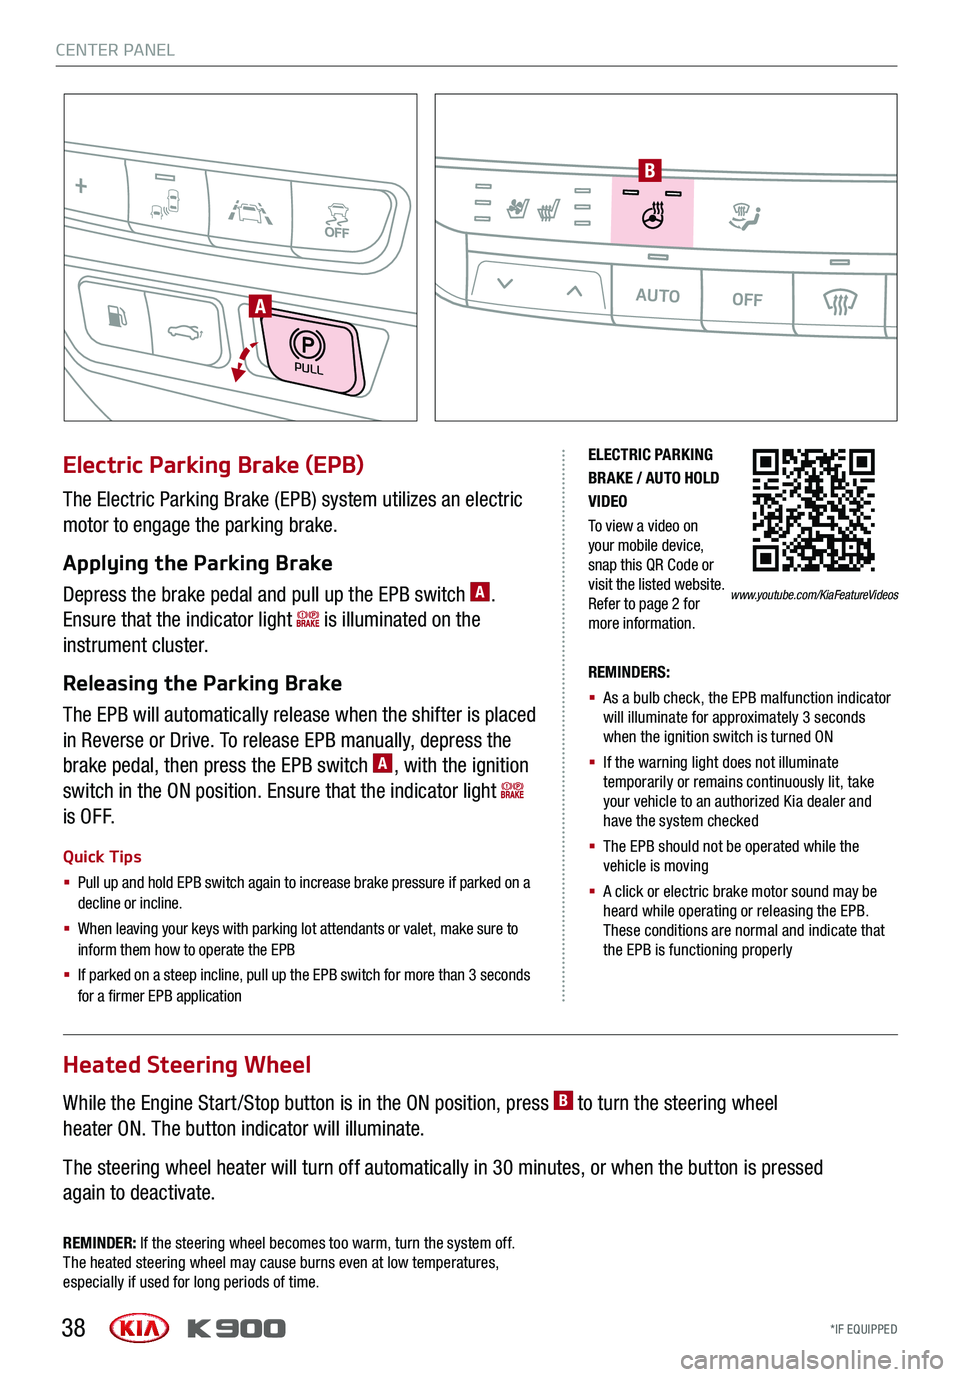 KIA K900 2019  Features and Functions Guide 38
ELECTRIC PARKING BRAKE / AUTO HOLD VIDEO
To view a video on your mobile device, snap this QR Code or visit the listed website. Refer to page 2 for more information.
The Electric Parking Brake (EPB)